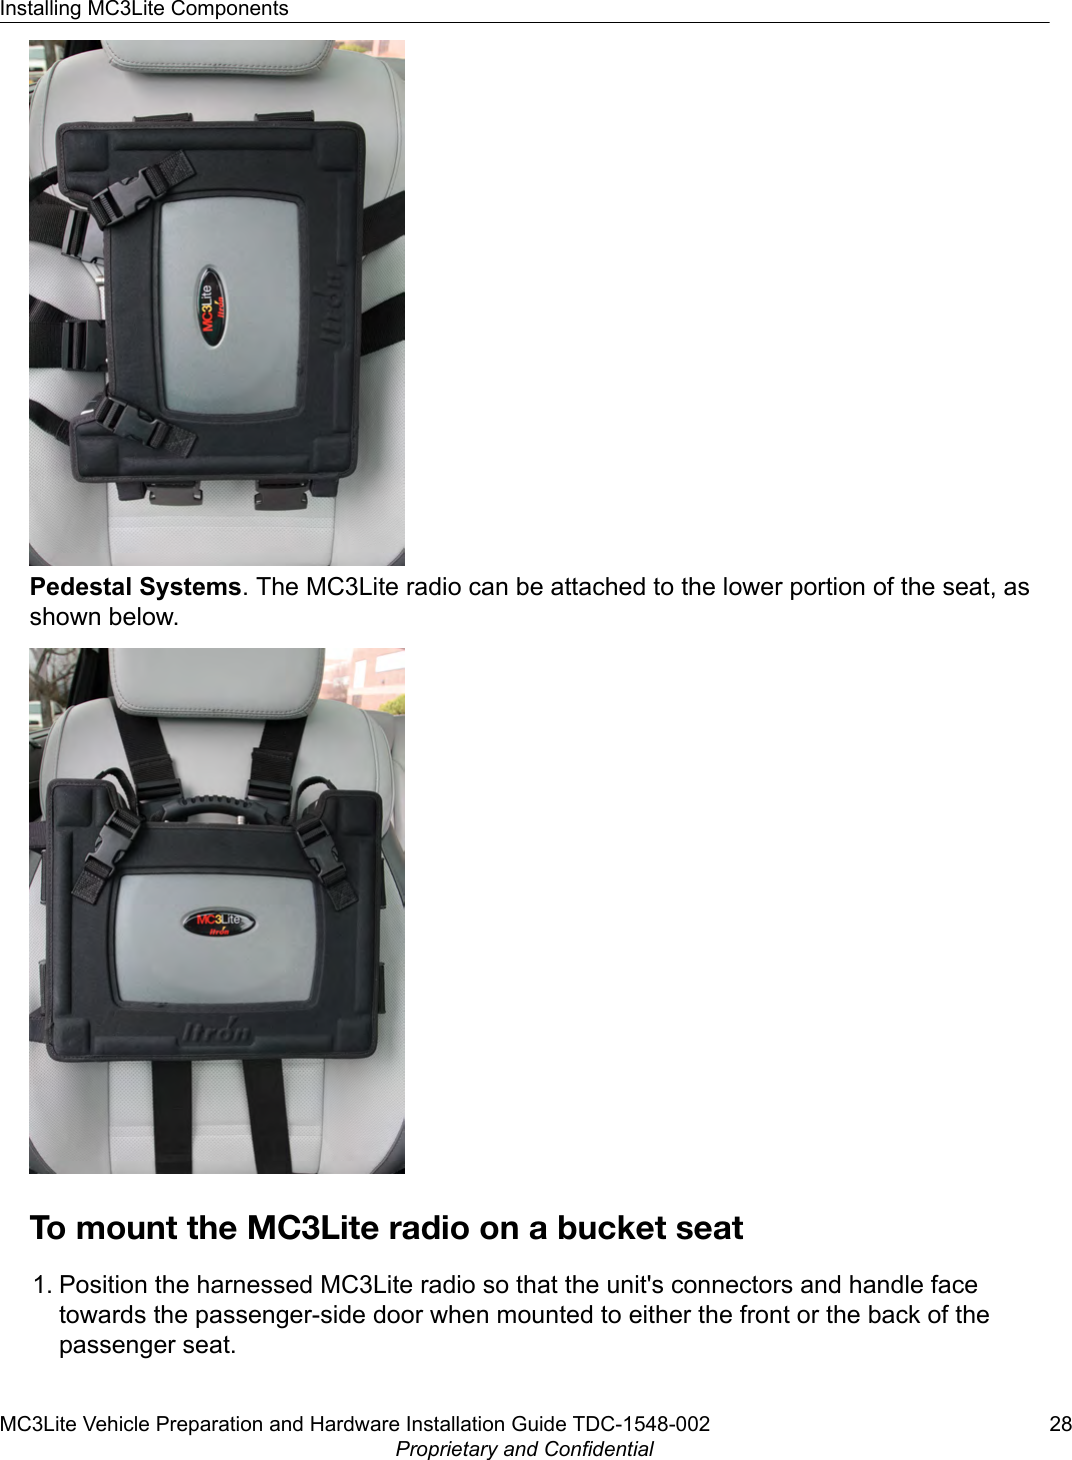 Pedestal Systems. The MC3Lite radio can be attached to the lower portion of the seat, asshown below.To mount the MC3Lite radio on a bucket seat1. Position the harnessed MC3Lite radio so that the unit&apos;s connectors and handle facetowards the passenger-side door when mounted to either the front or the back of thepassenger seat.Installing MC3Lite ComponentsMC3Lite Vehicle Preparation and Hardware Installation Guide TDC-1548-002 28Proprietary and Confidential